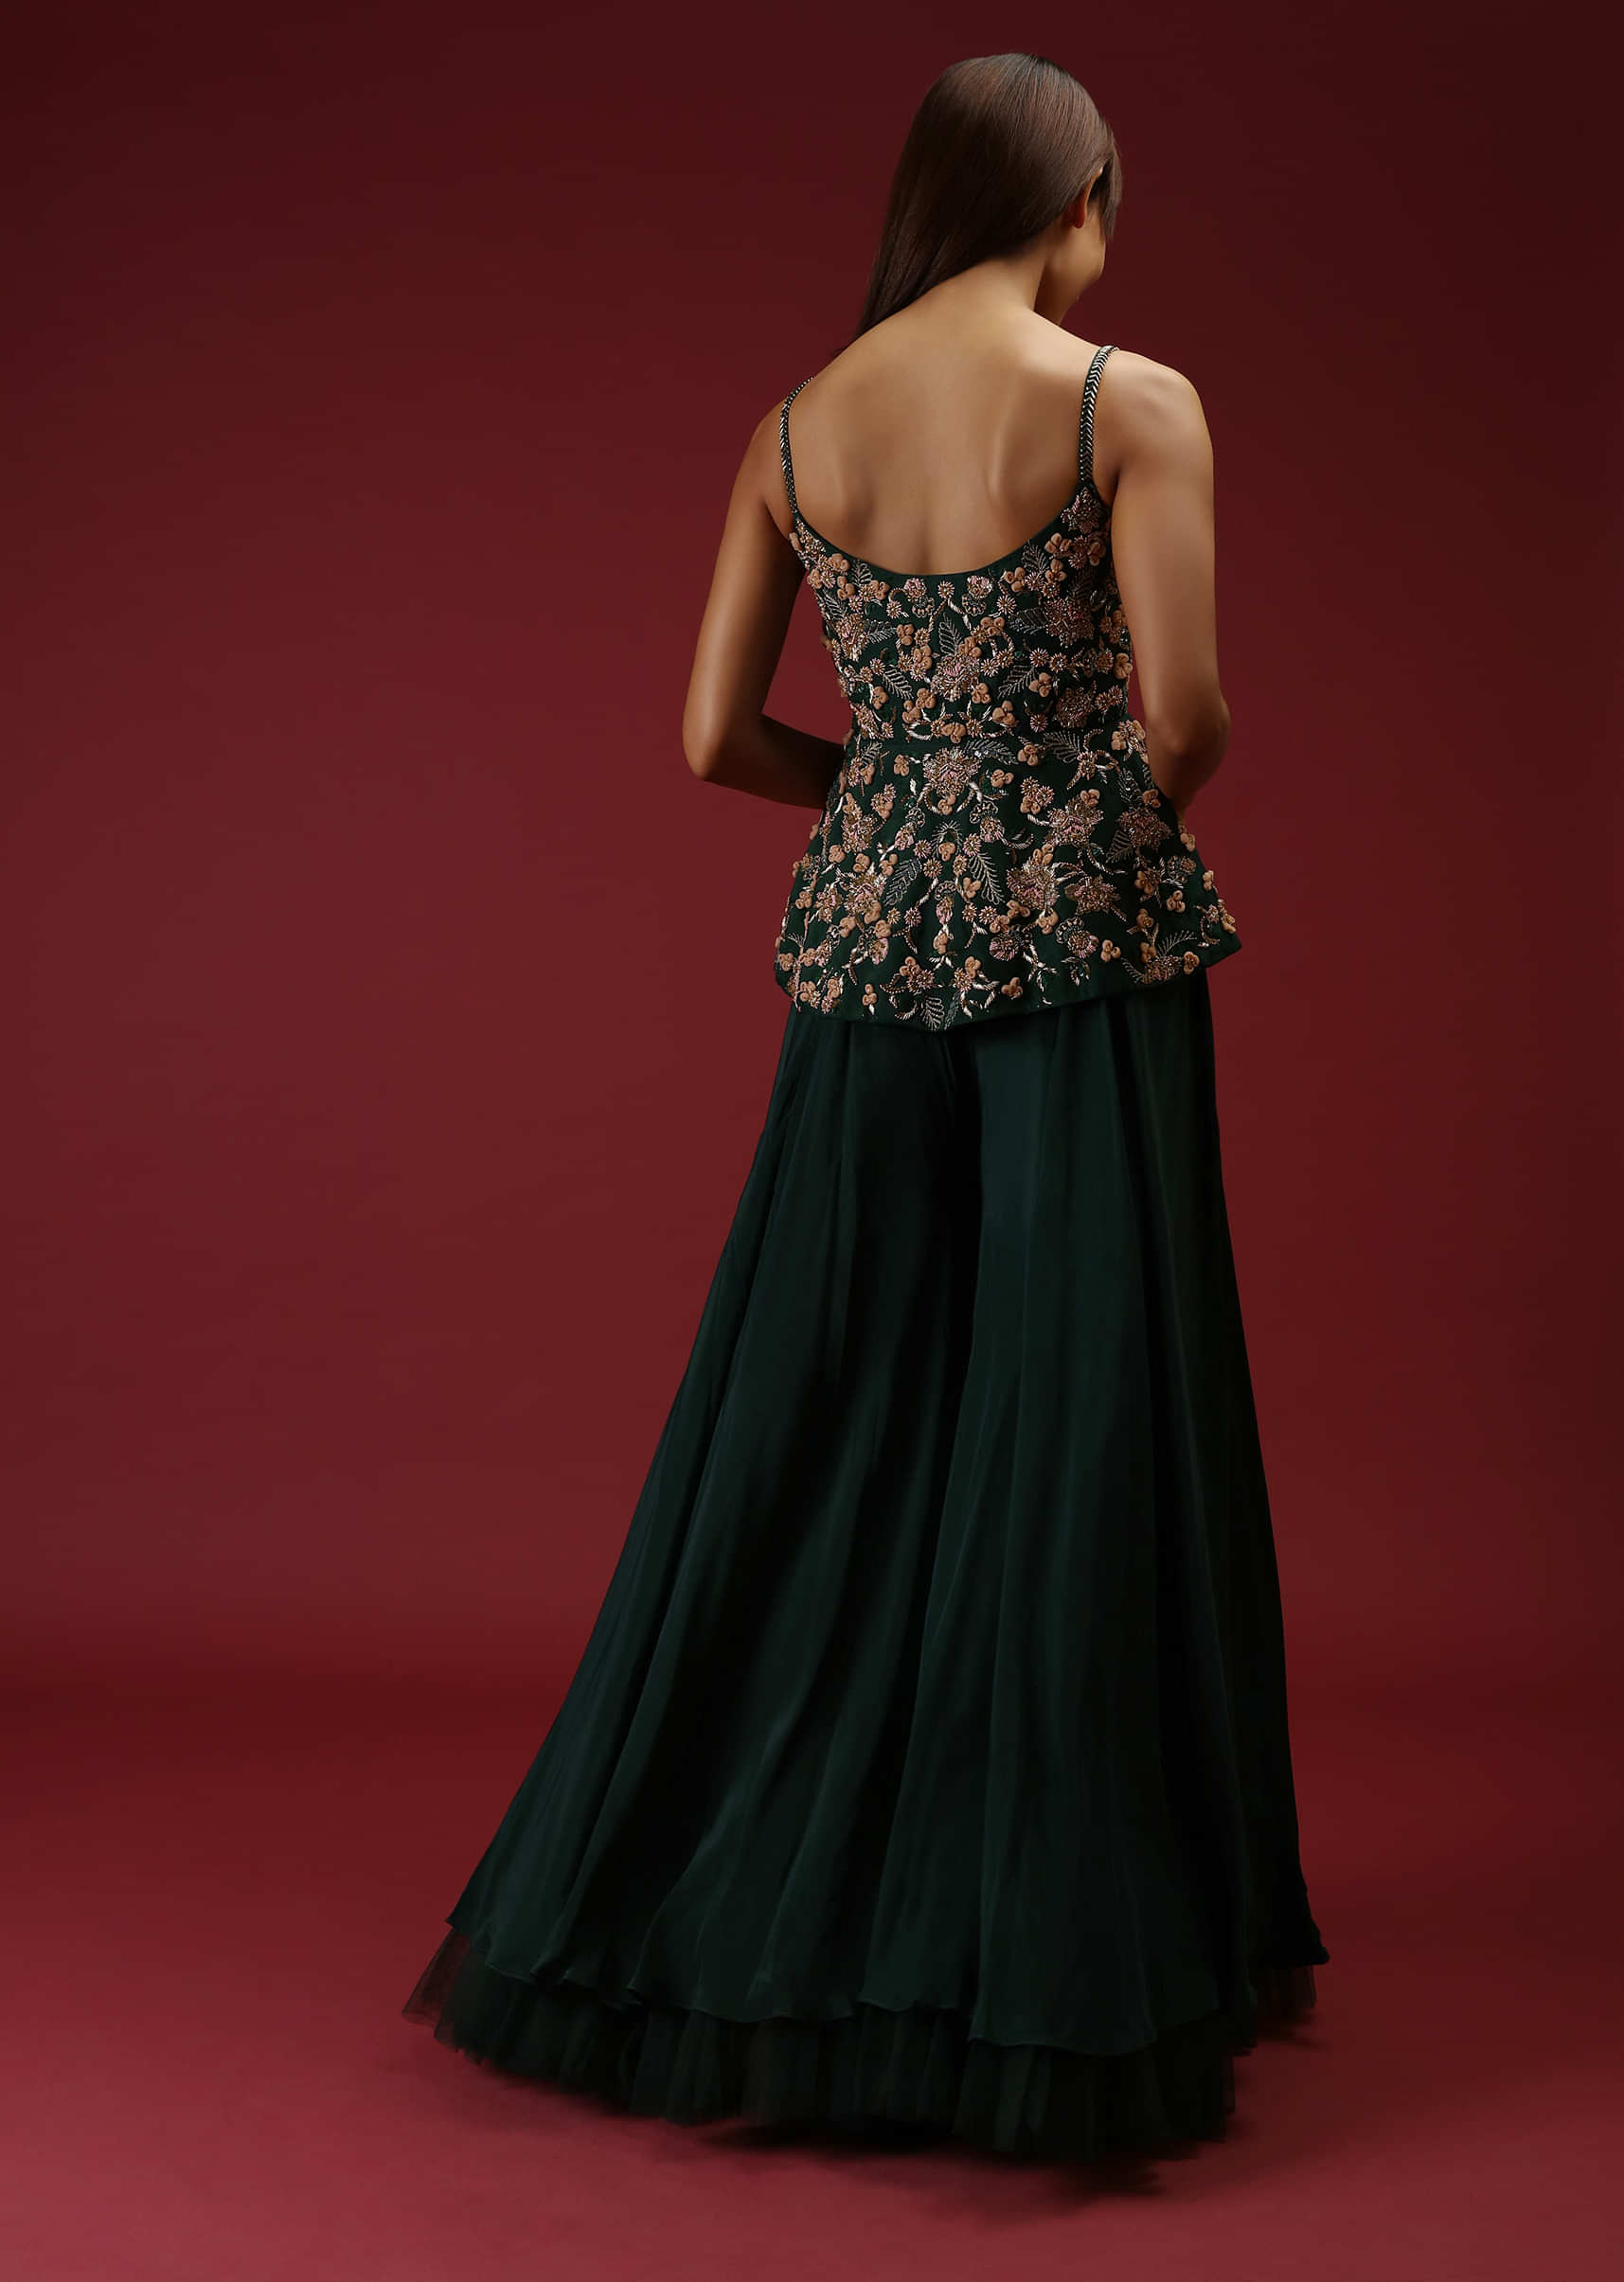 Bottle Green Palazzo Pants With A Heavy Hand Embroidered Peplum Top Adorned In Multicolored Beads And 3D Flowers  